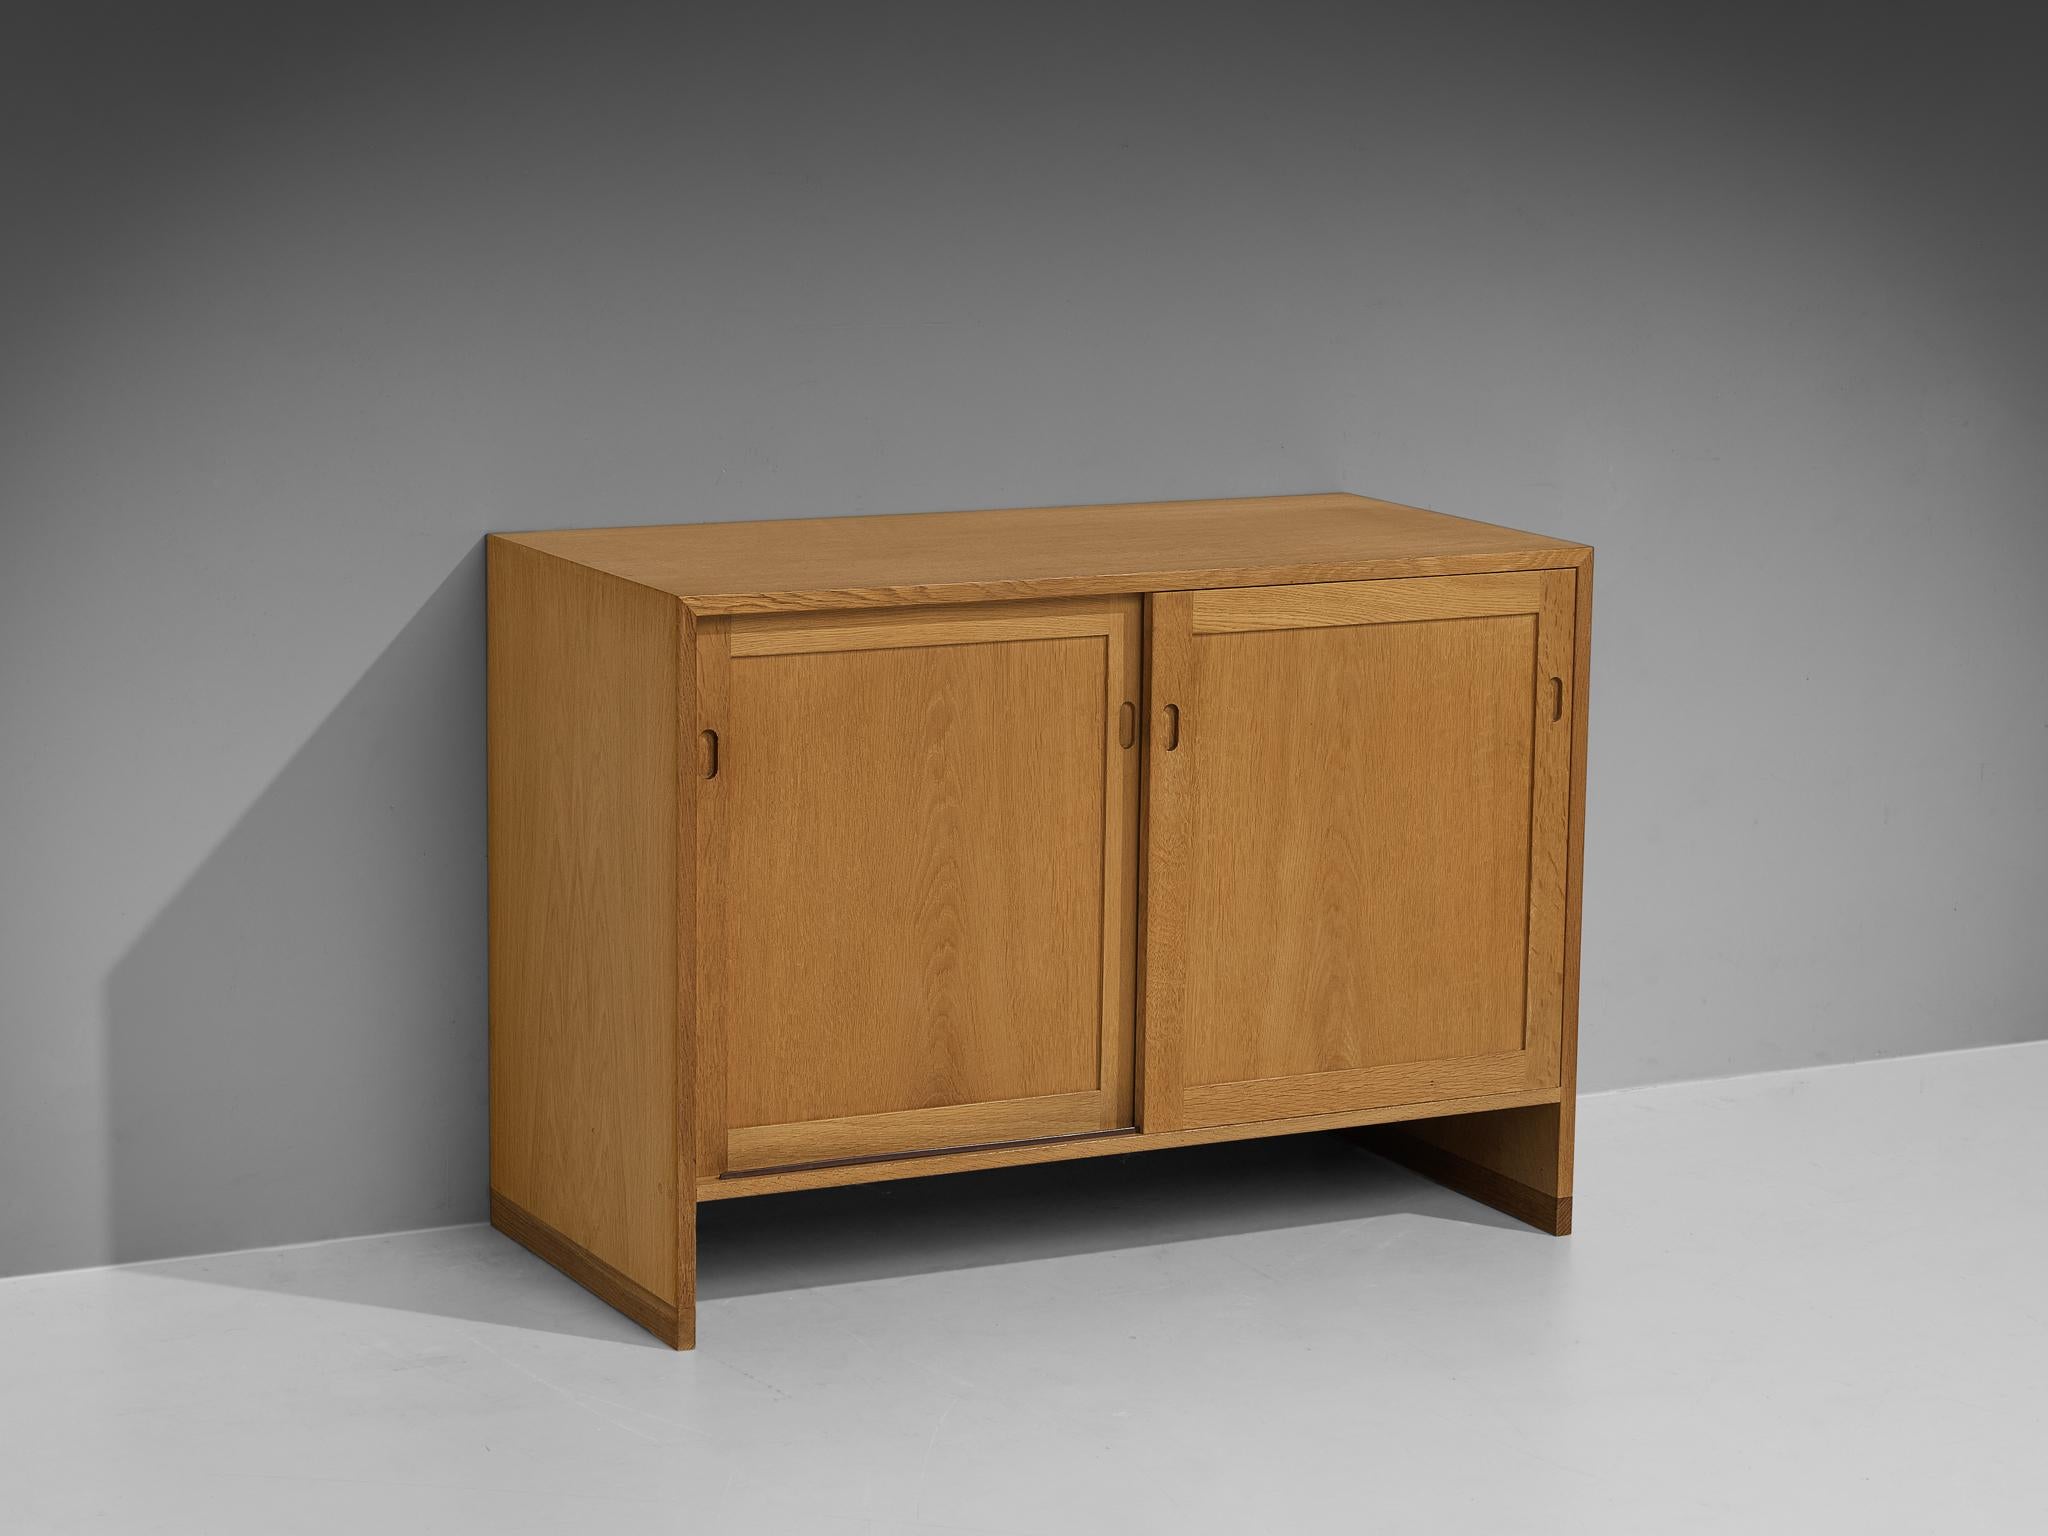 Hans Wegner for Ry Møbler, cabinet, oak, Denmark, 1960s.

This cabinet is executed in oak and is typical for Mid-Century Scandinavian design. It contains two sliding doors which reveals two inner compartments with shelves and offer plenty of